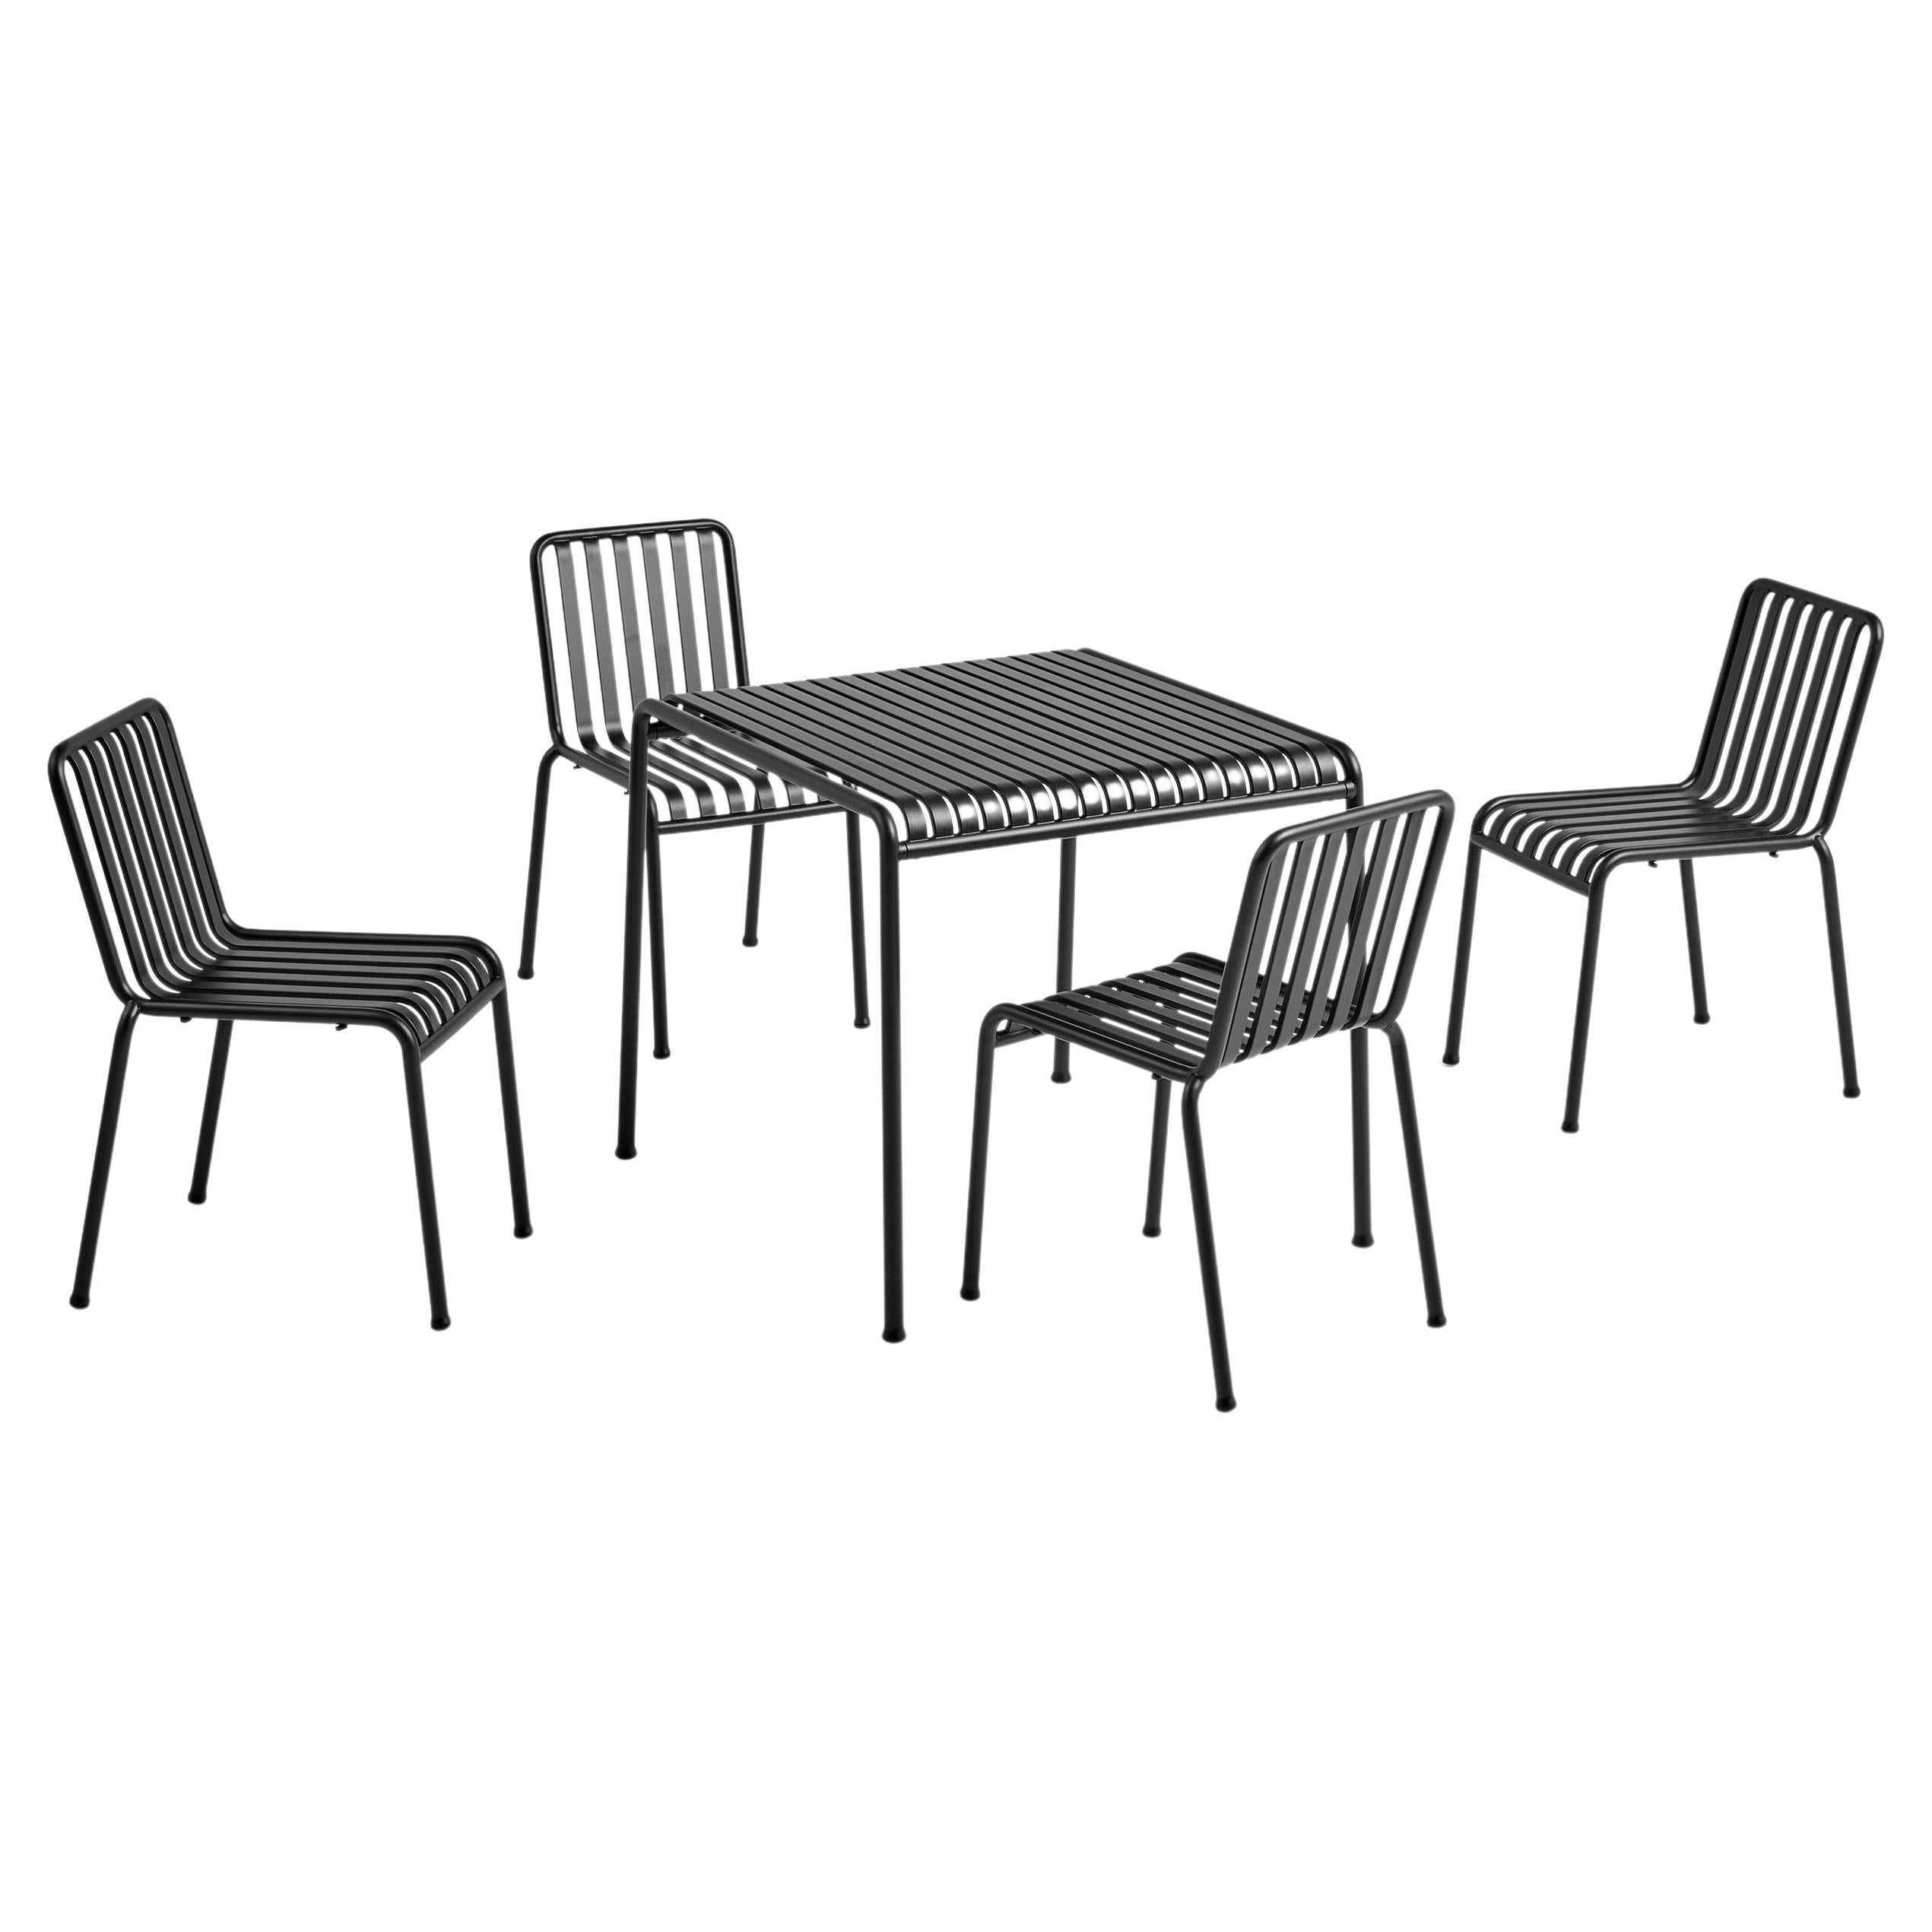 Set of Palissade Table & Chairs, Anthracite by Ronan/Erwan Bouroullec for Hay For Sale